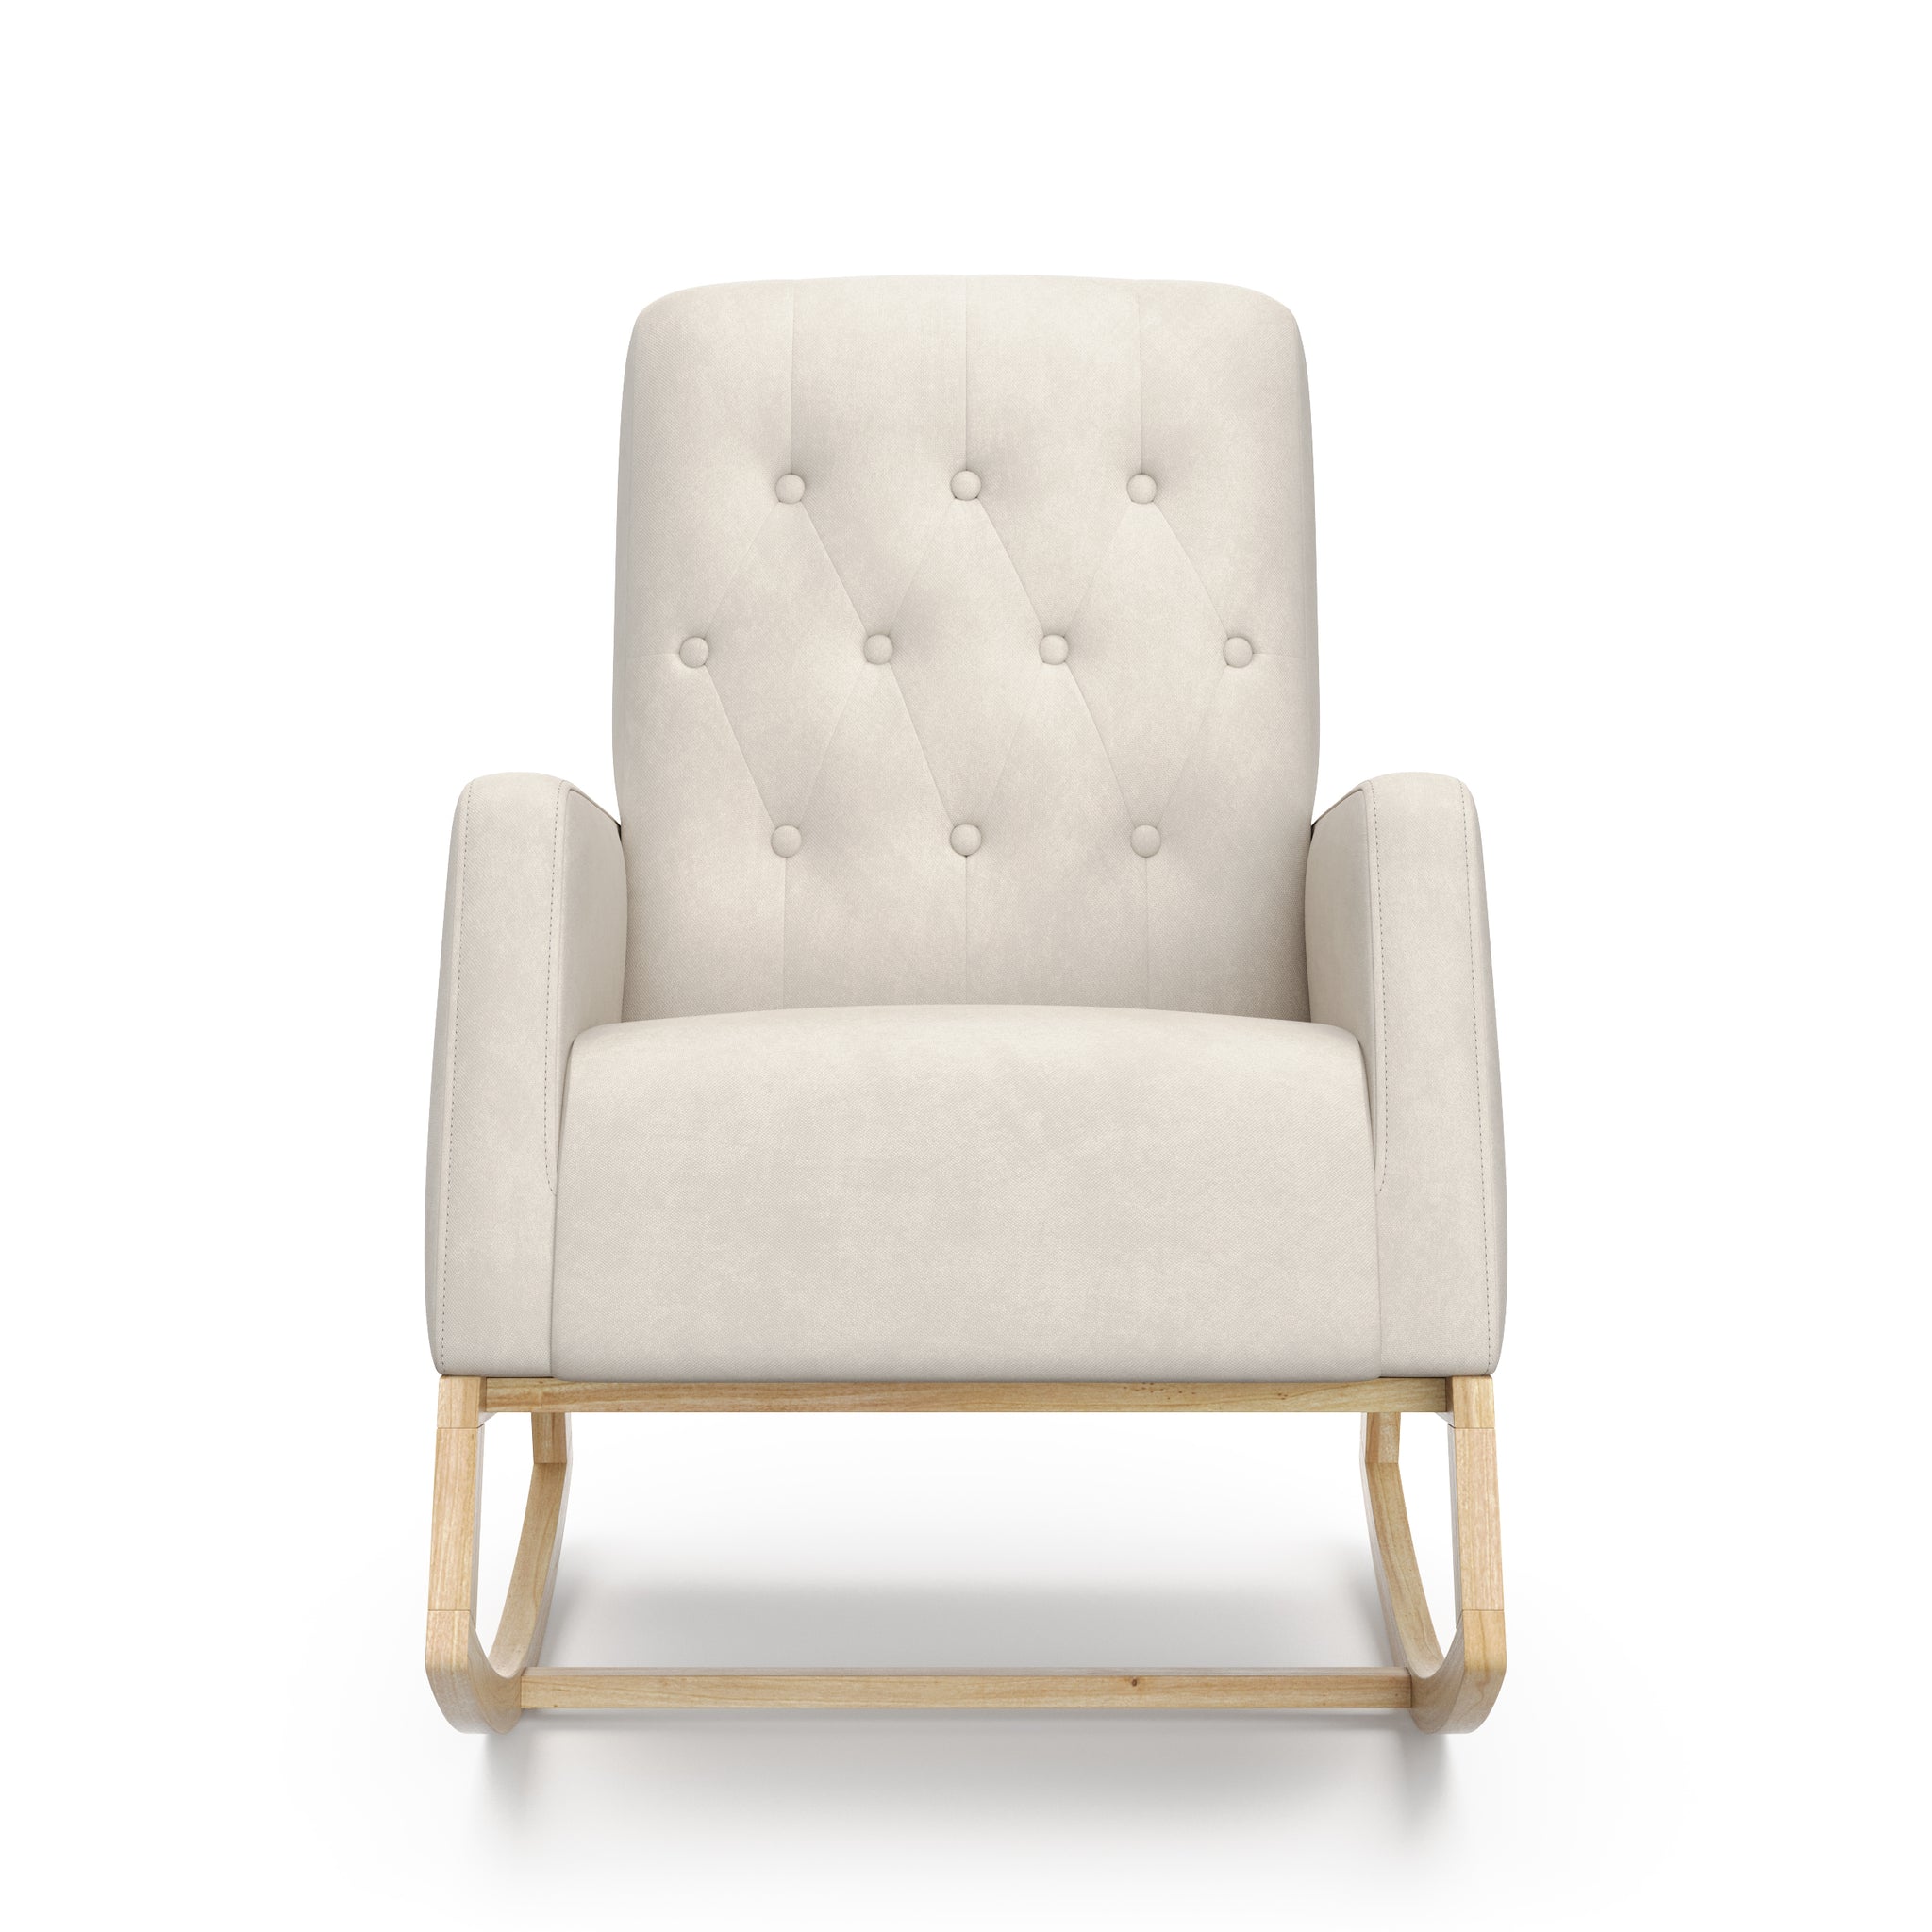 Natural with ivory rocker front view